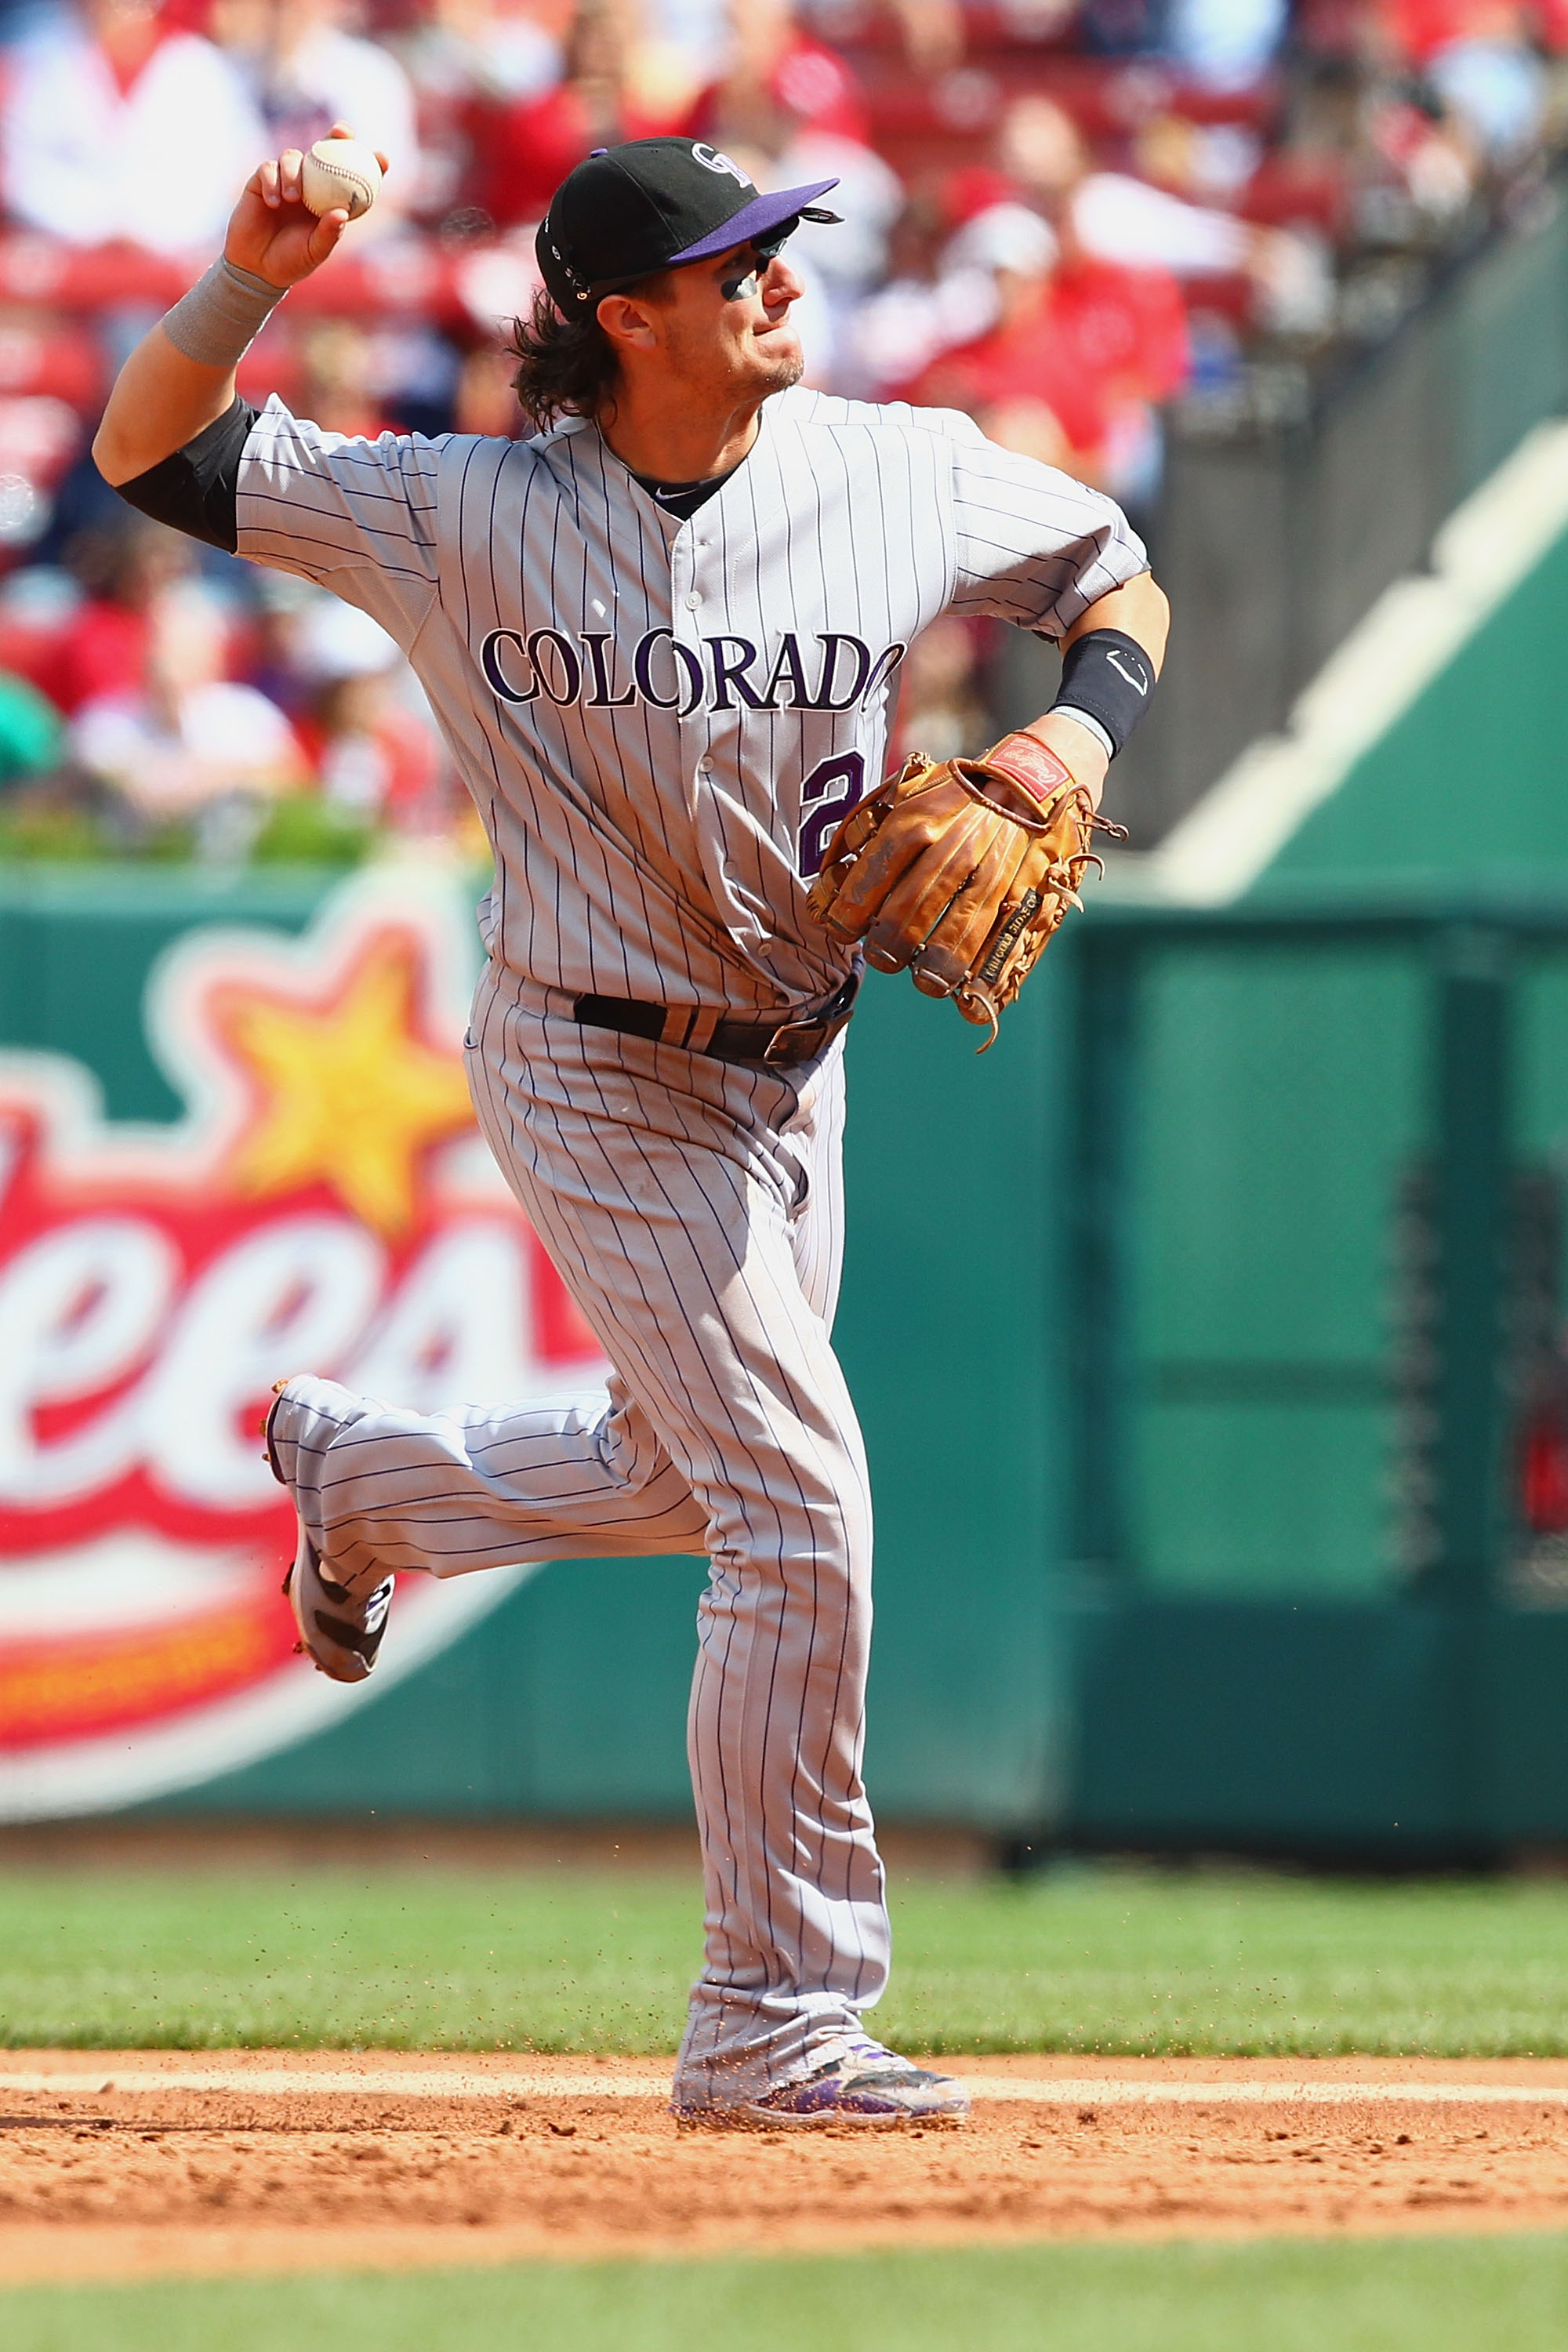 ST. LOUIS - OCTOBER 2: Troy Tulowitzki #2 of the Colorado Rockies throws to first base against the St. Louis Cardinals at Busch Stadium on October 2, 2010 in St. Louis, Missouri.  The Cardinals beat the Rockies 1-0 in 11 innings.  (Photo by Dilip Vishwana